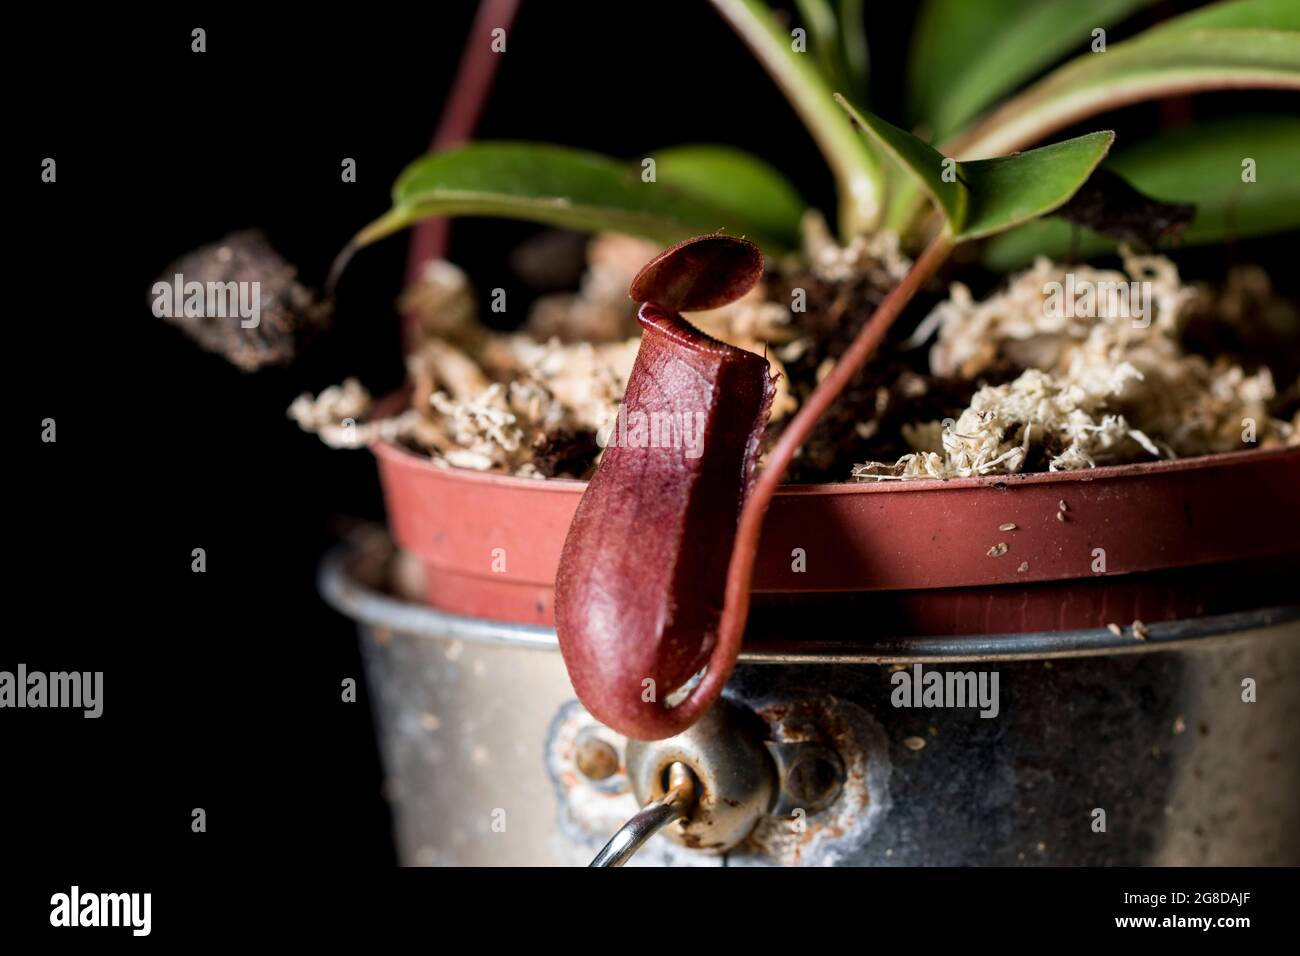 Nepenthes carnivorous Asian pitcher plant bloom ready to catch insects. Monkey cup plant. Stock Photo